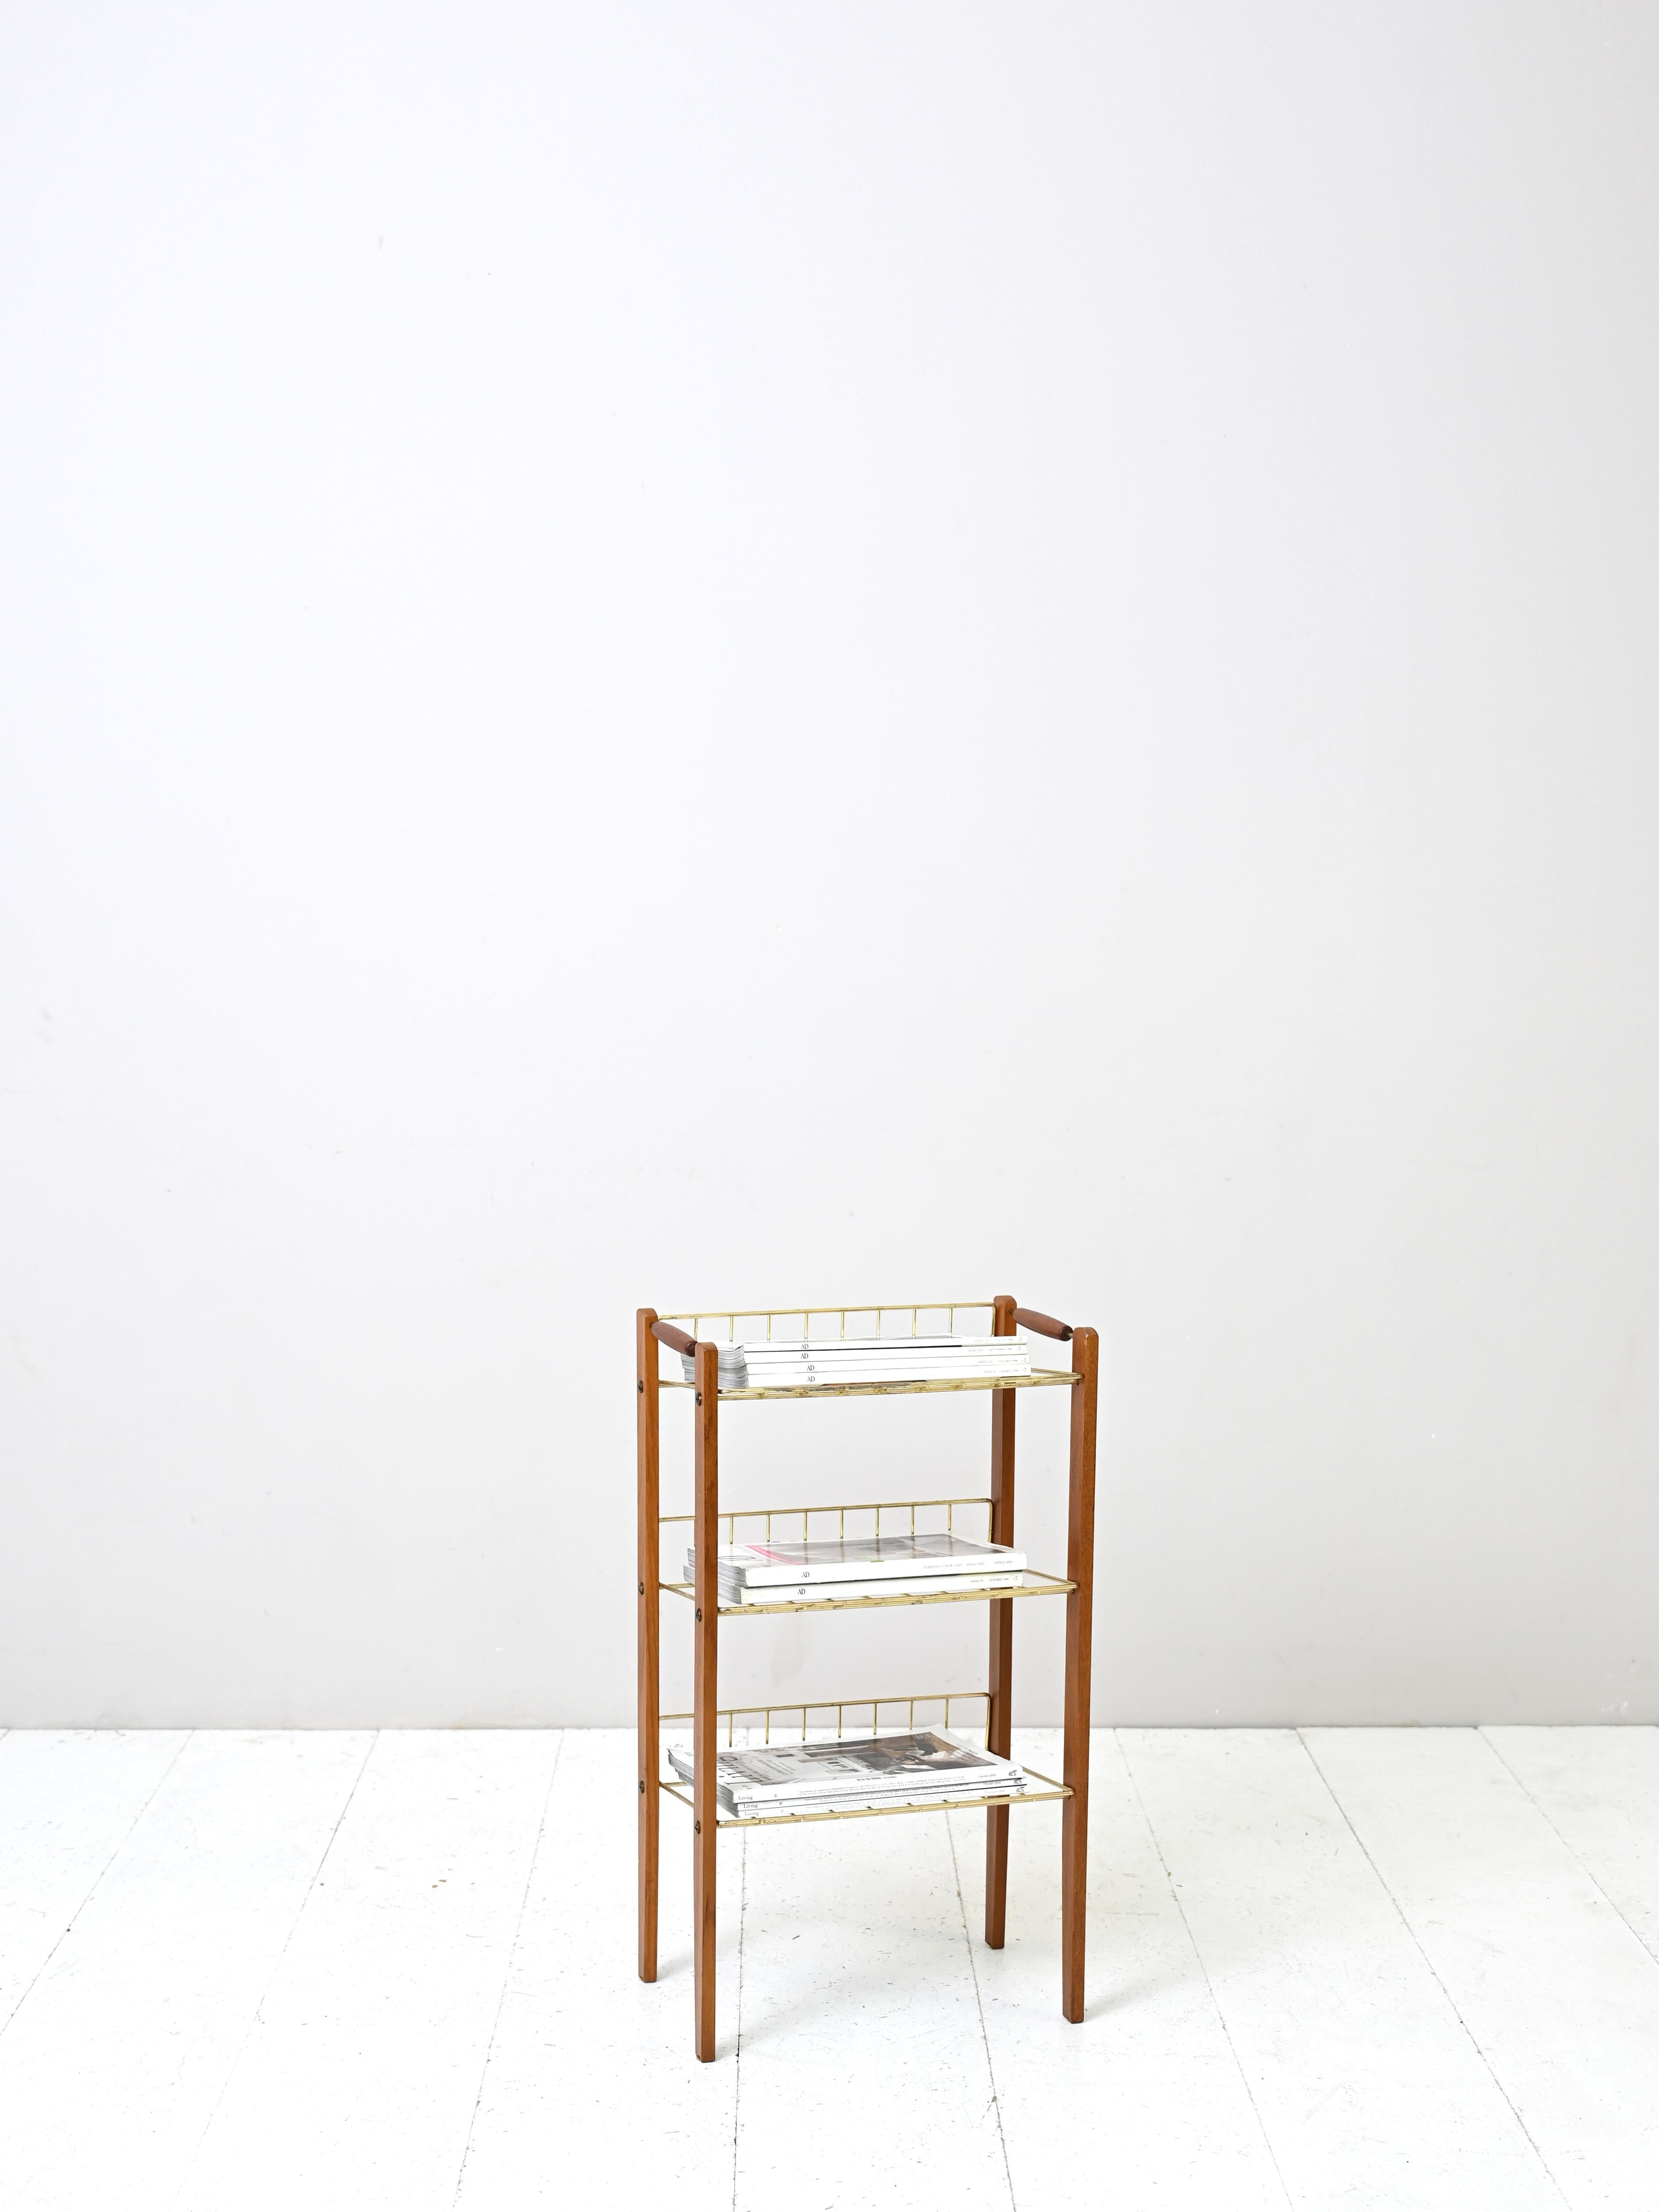 Scandinavian magazine rack with three shelves.
The frame is made of metal and teak wood.

Scandinavian original vintage manufacture from the 1950s.

Good condition. A conservative restoration has been done. May show signs of time. Please pay